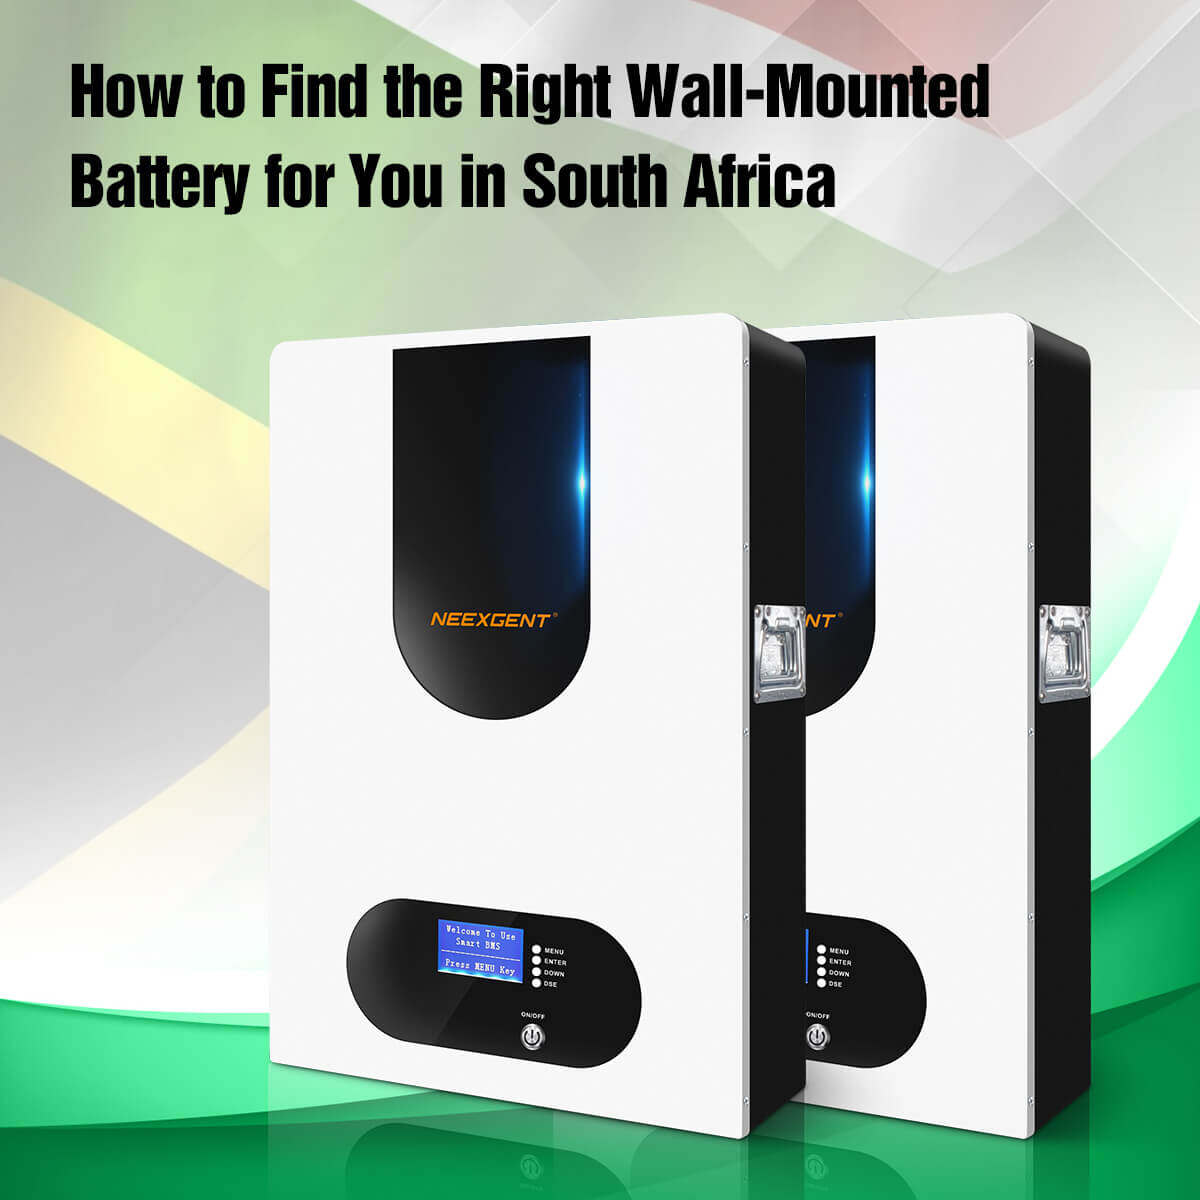 How to Find the Right Wall-Mounted Battery for You in South Africa